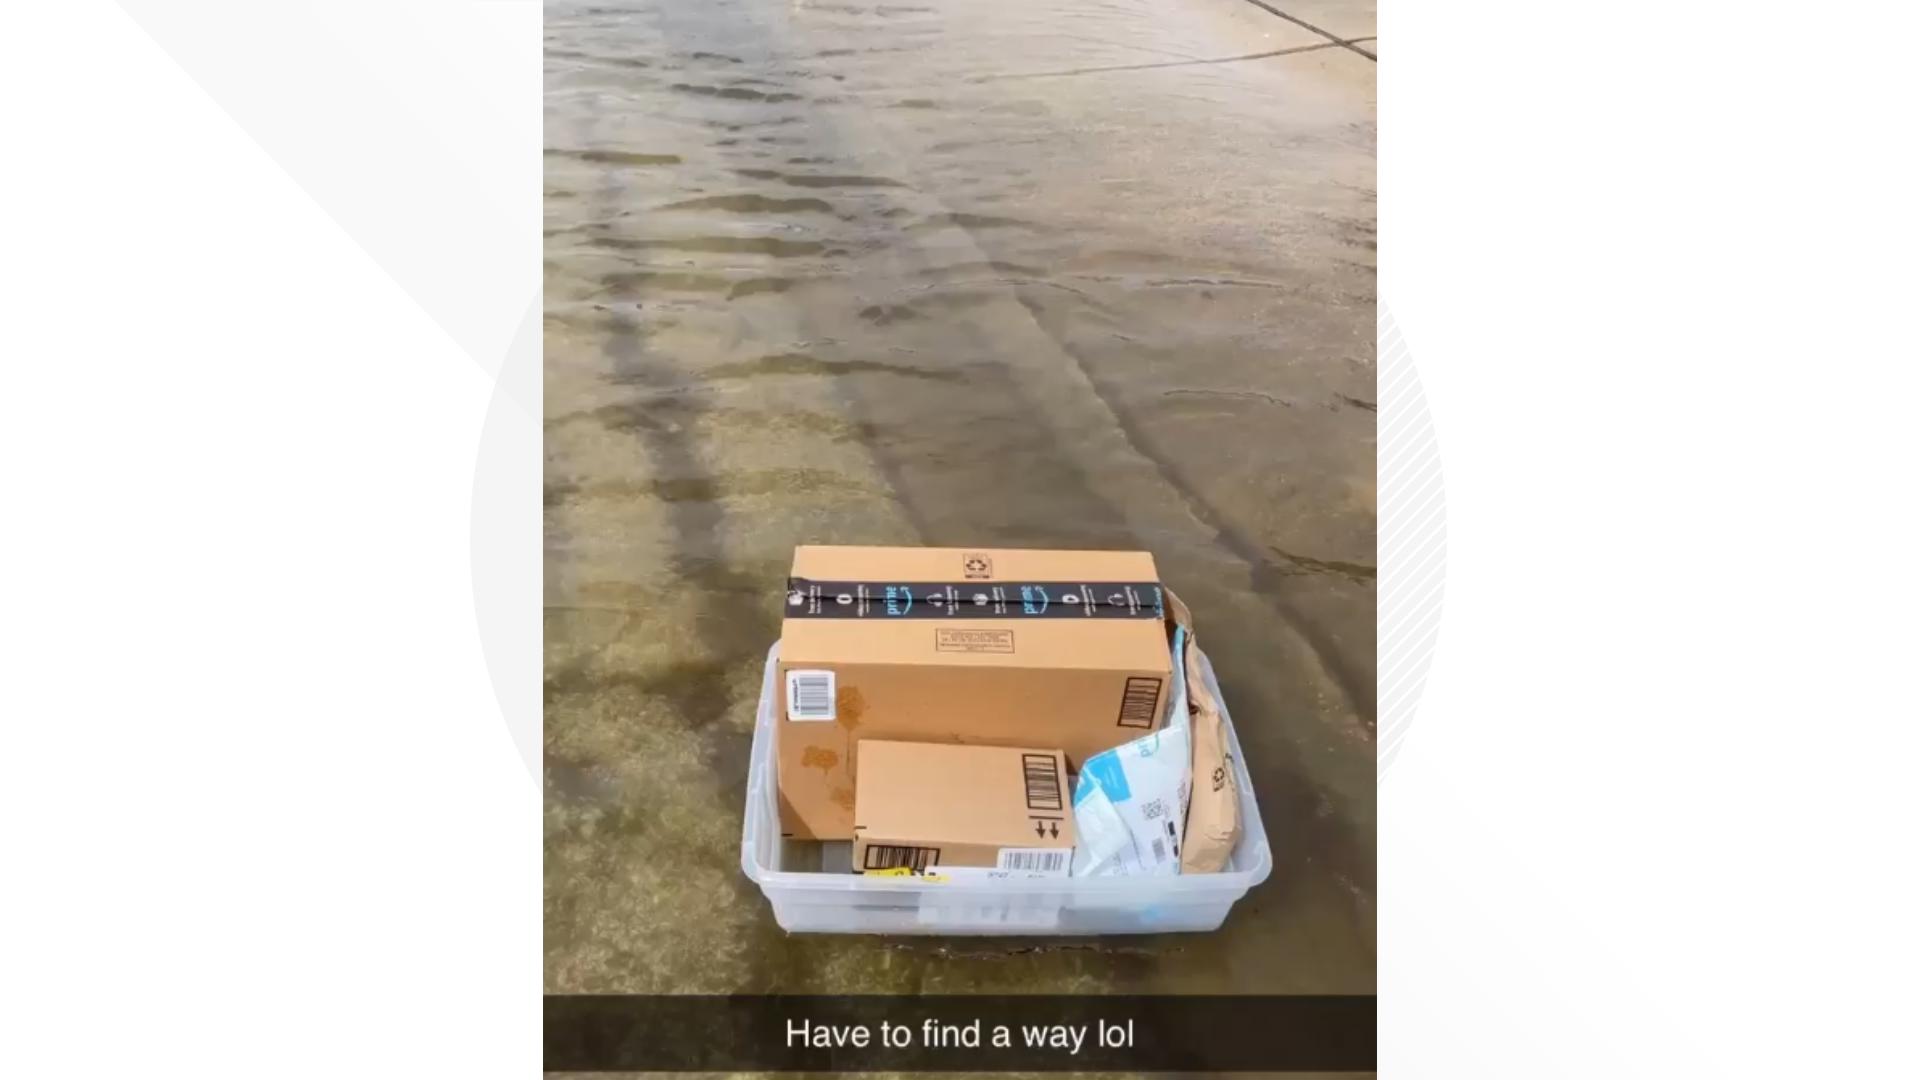 Miranda Maldonado wrote to 3NEWS saying she is an Amazon delivery driver who is finding a creative way to make her rounds in the aftermath of Tropical Storm Alberto.